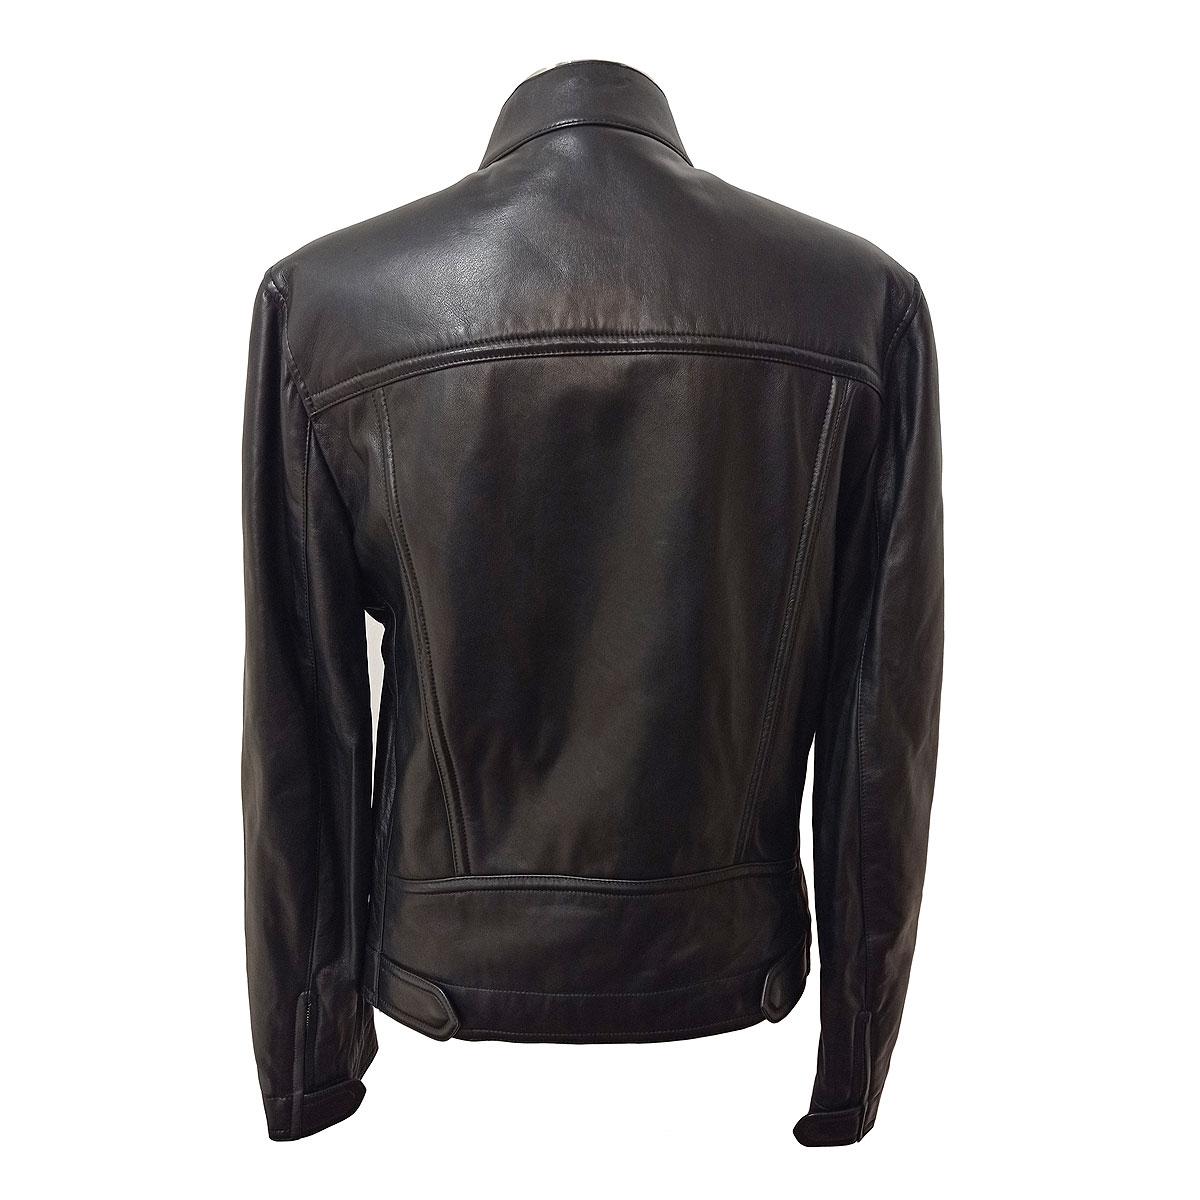 Amazing and top quality lamb jacket by Tom Ford
Unisex
Supersoft genuine lambskin leather
Black color
Central zip
3 pockets
Length shoulder / hem cm 52 (20,47 inches)
Shoulder cm 40 (15,7 inches)
Worldwide express shipping included in the price !